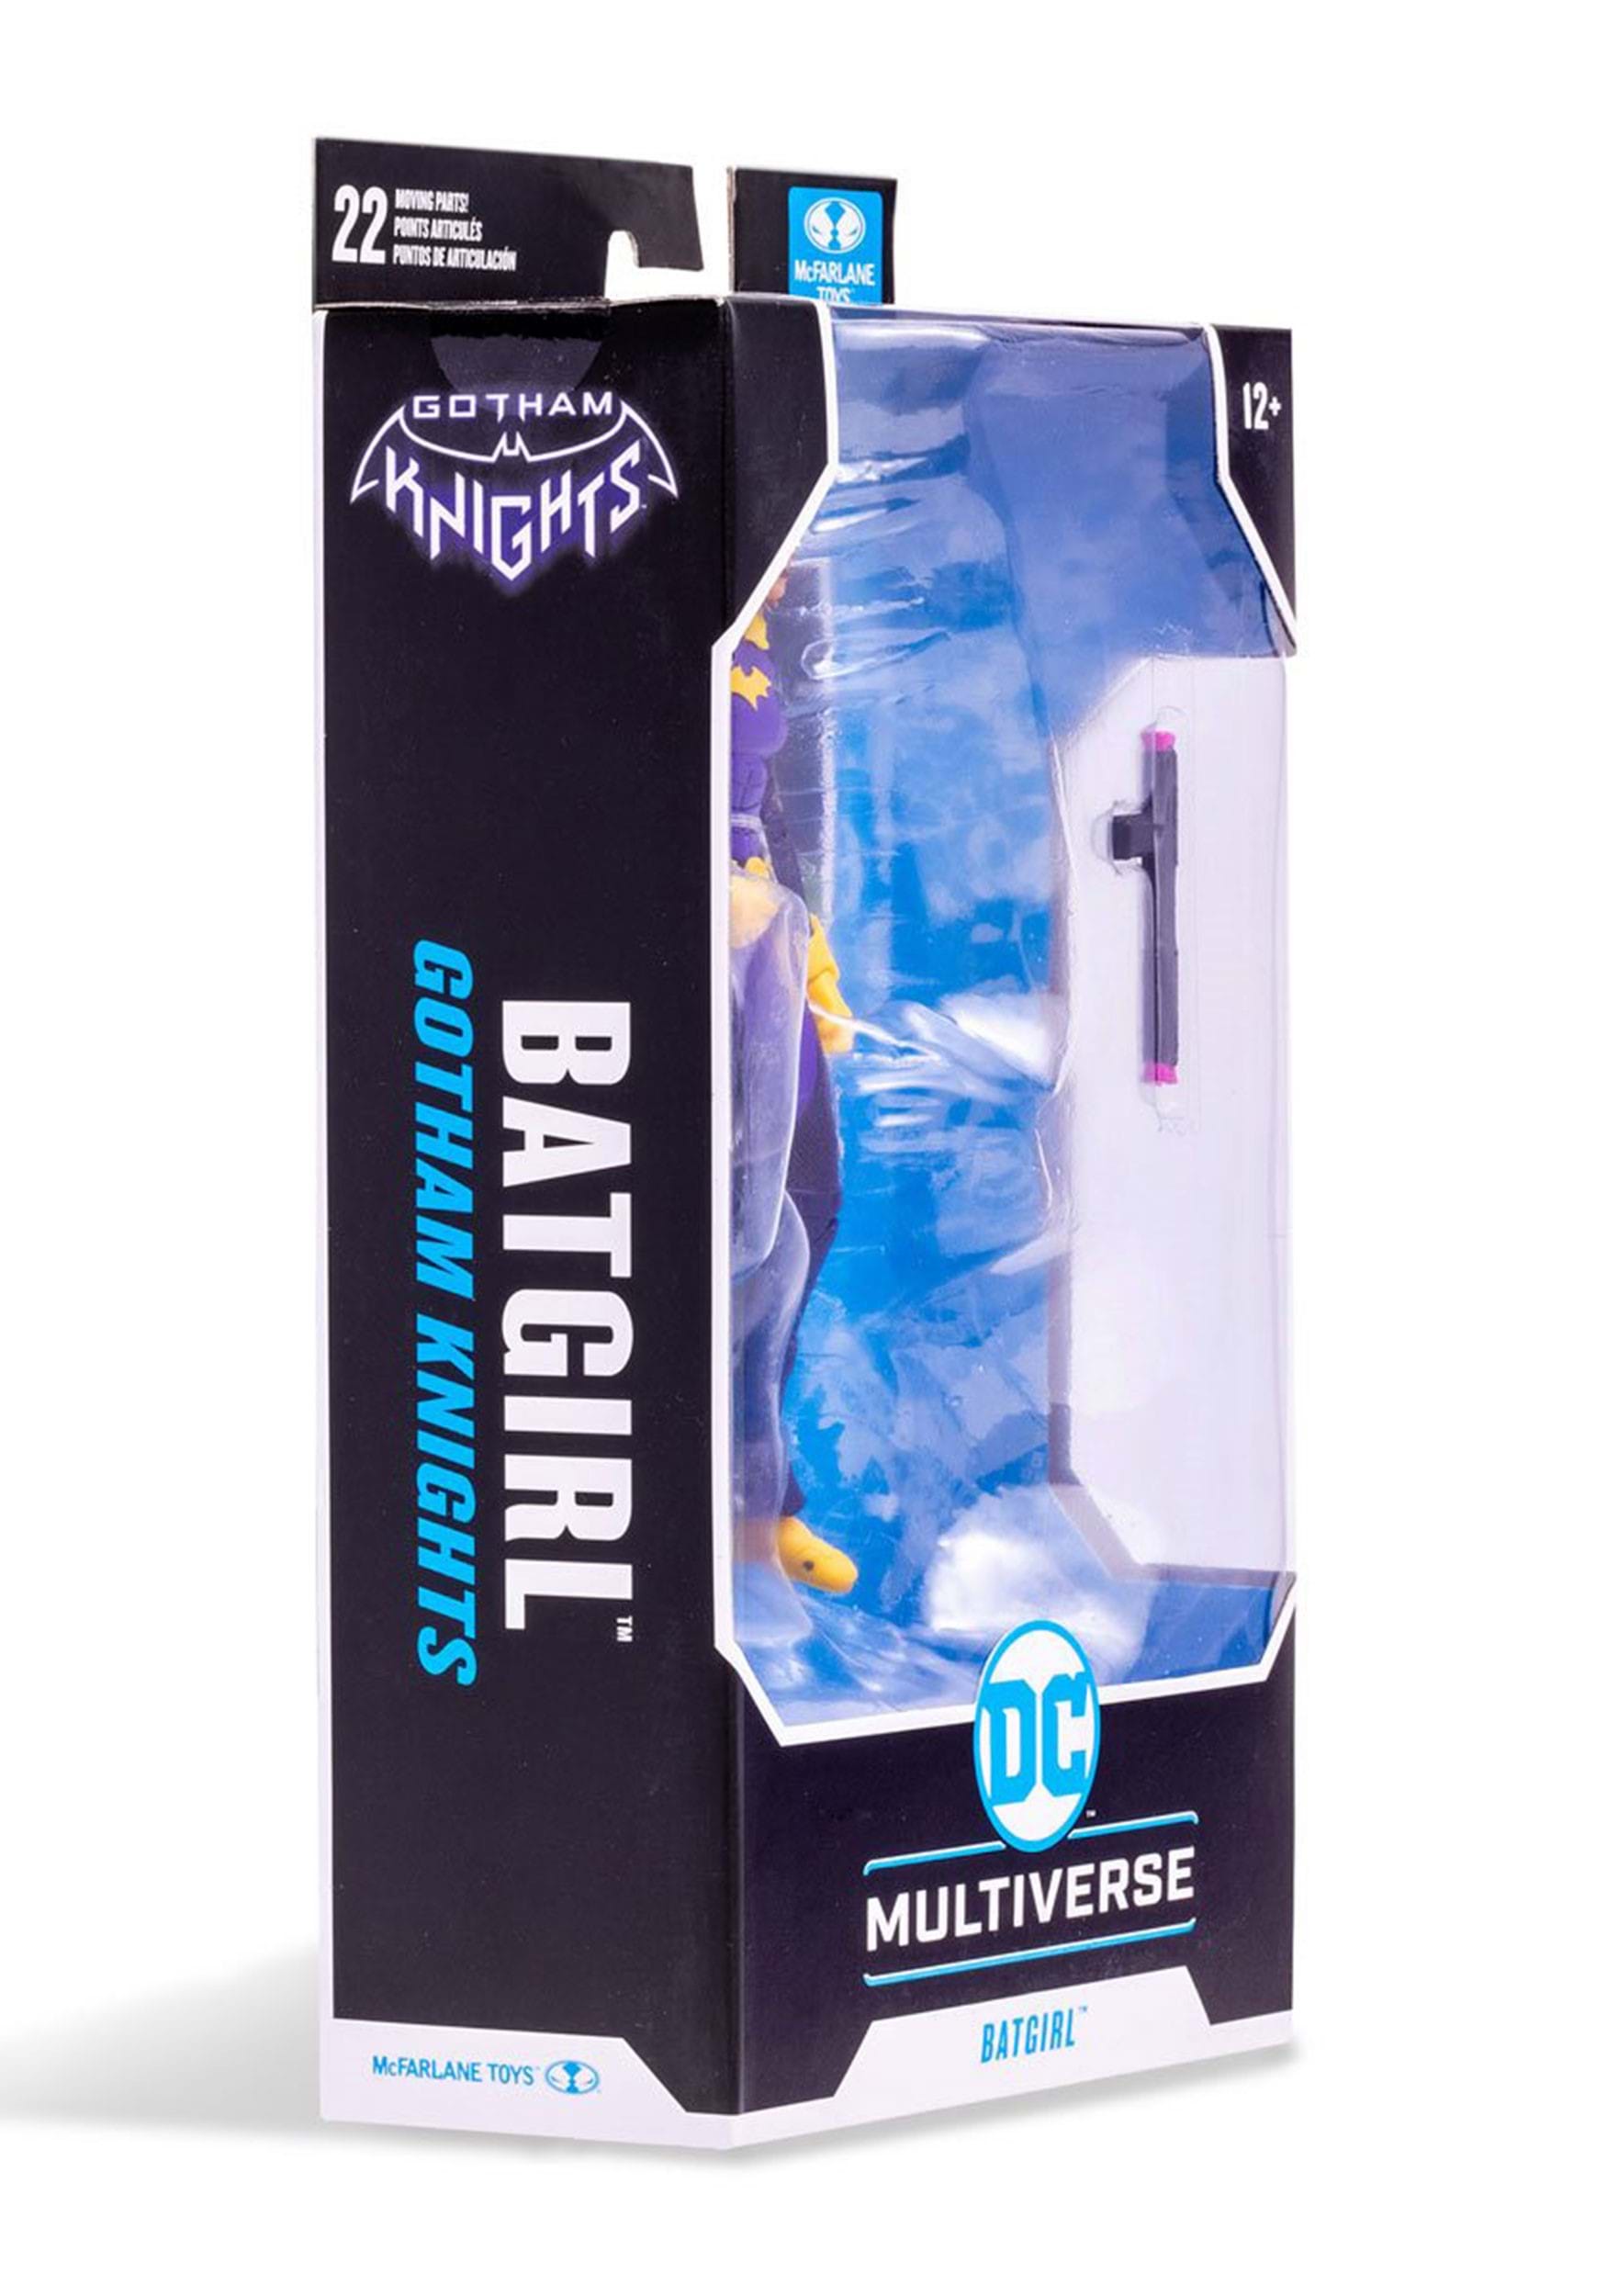  McFarlane Toys - DC Multiverse Nightwing (Gotham Knights) 7  Action Figure with Accessories : McFarlane DC: Toys & Games